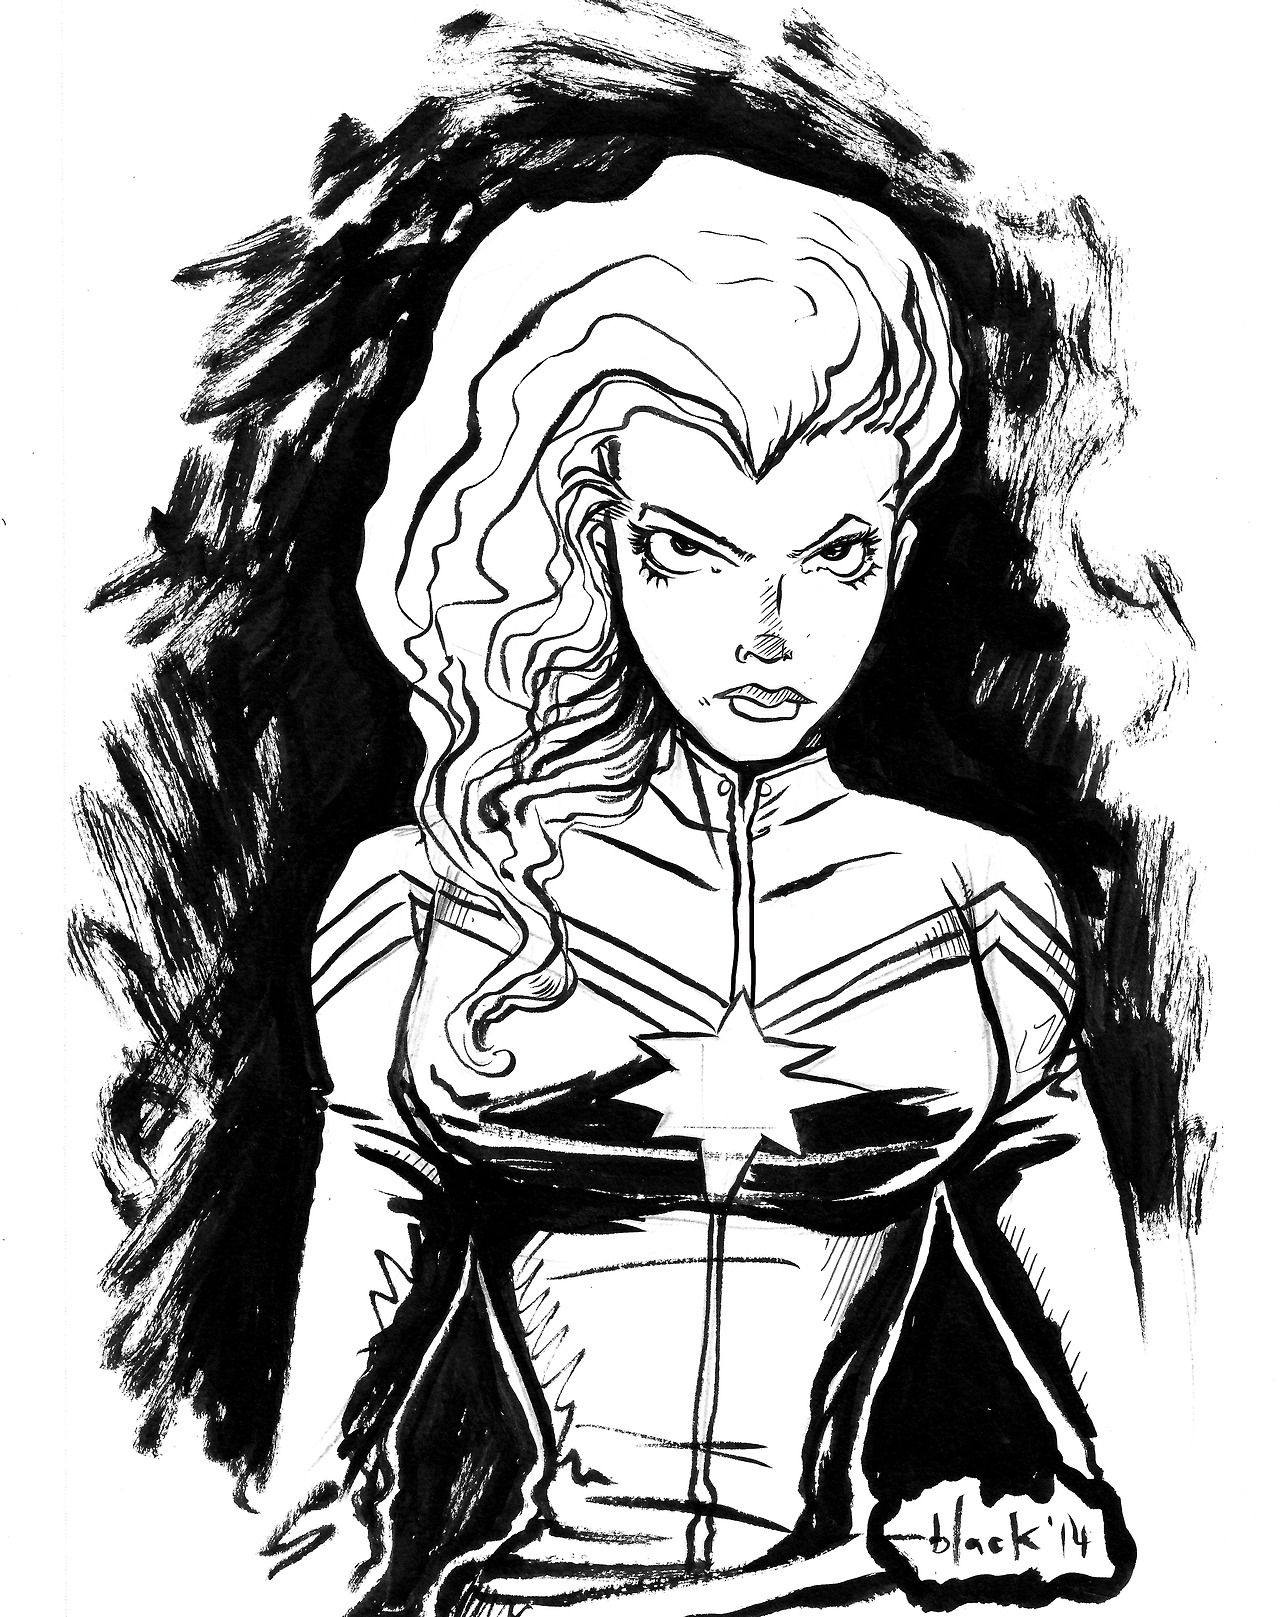 Captain Marvel Coloring Pages - Coloring Home